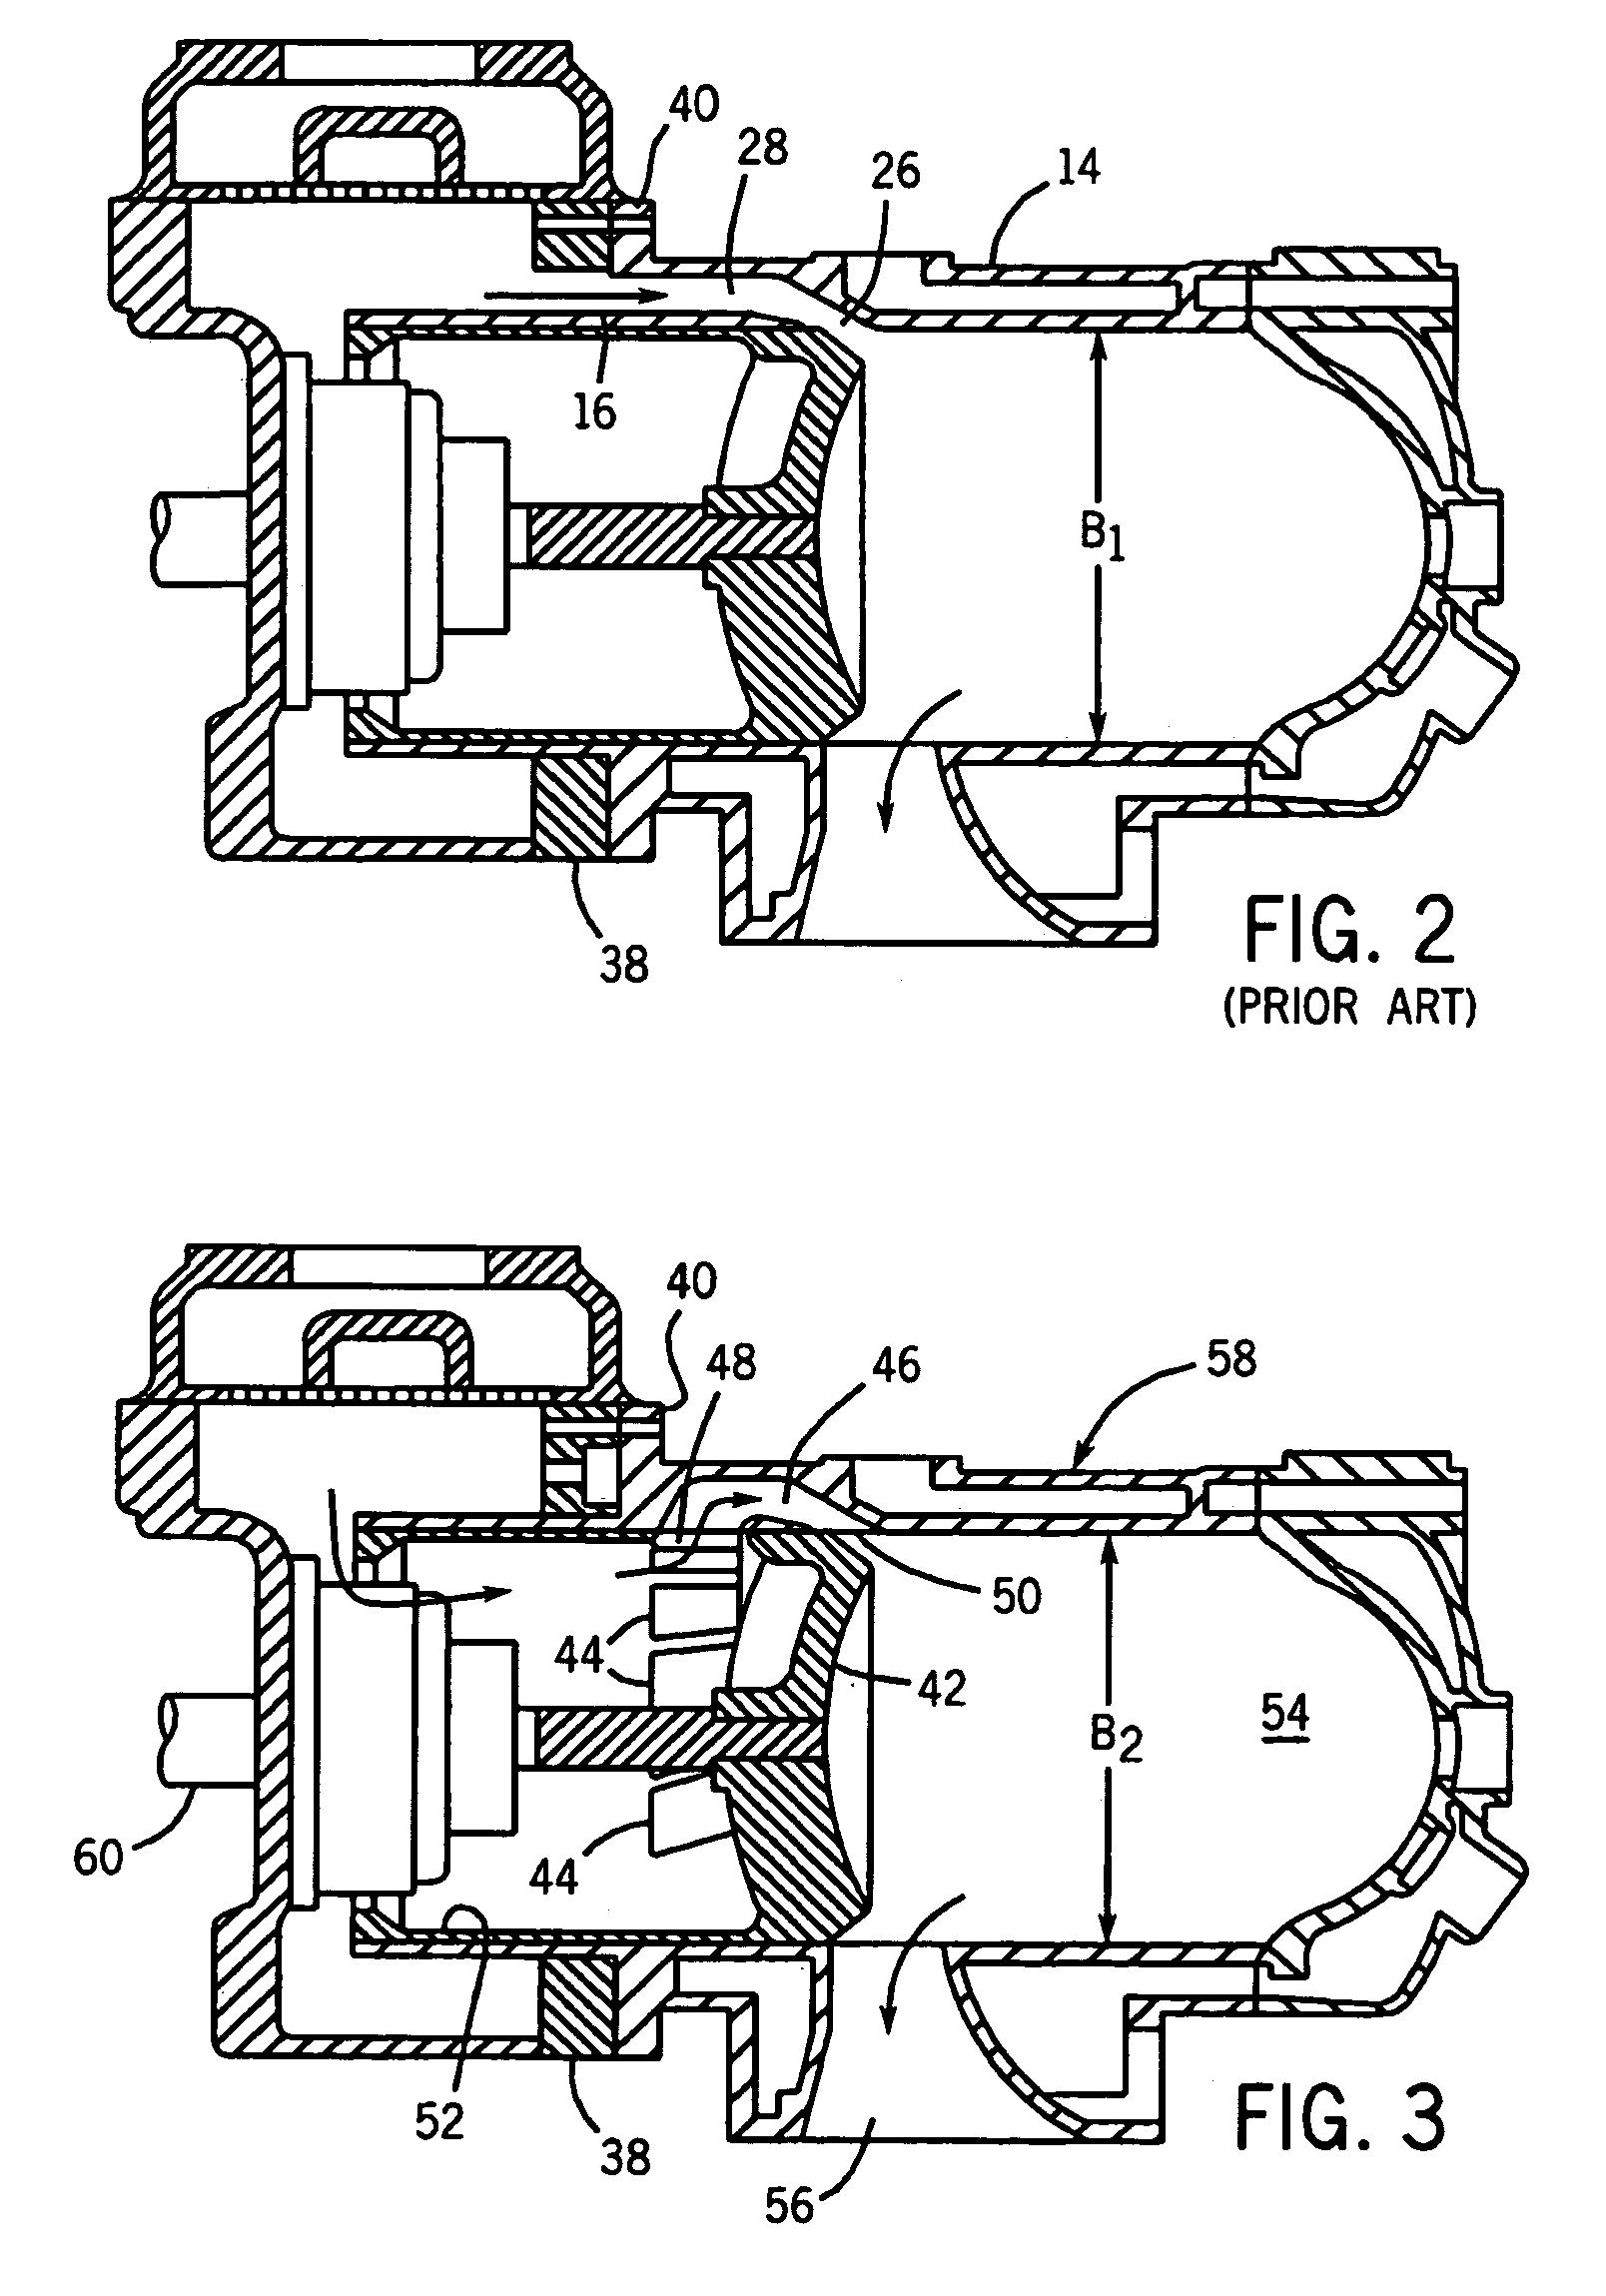 Air intake porting for a two stroke engine